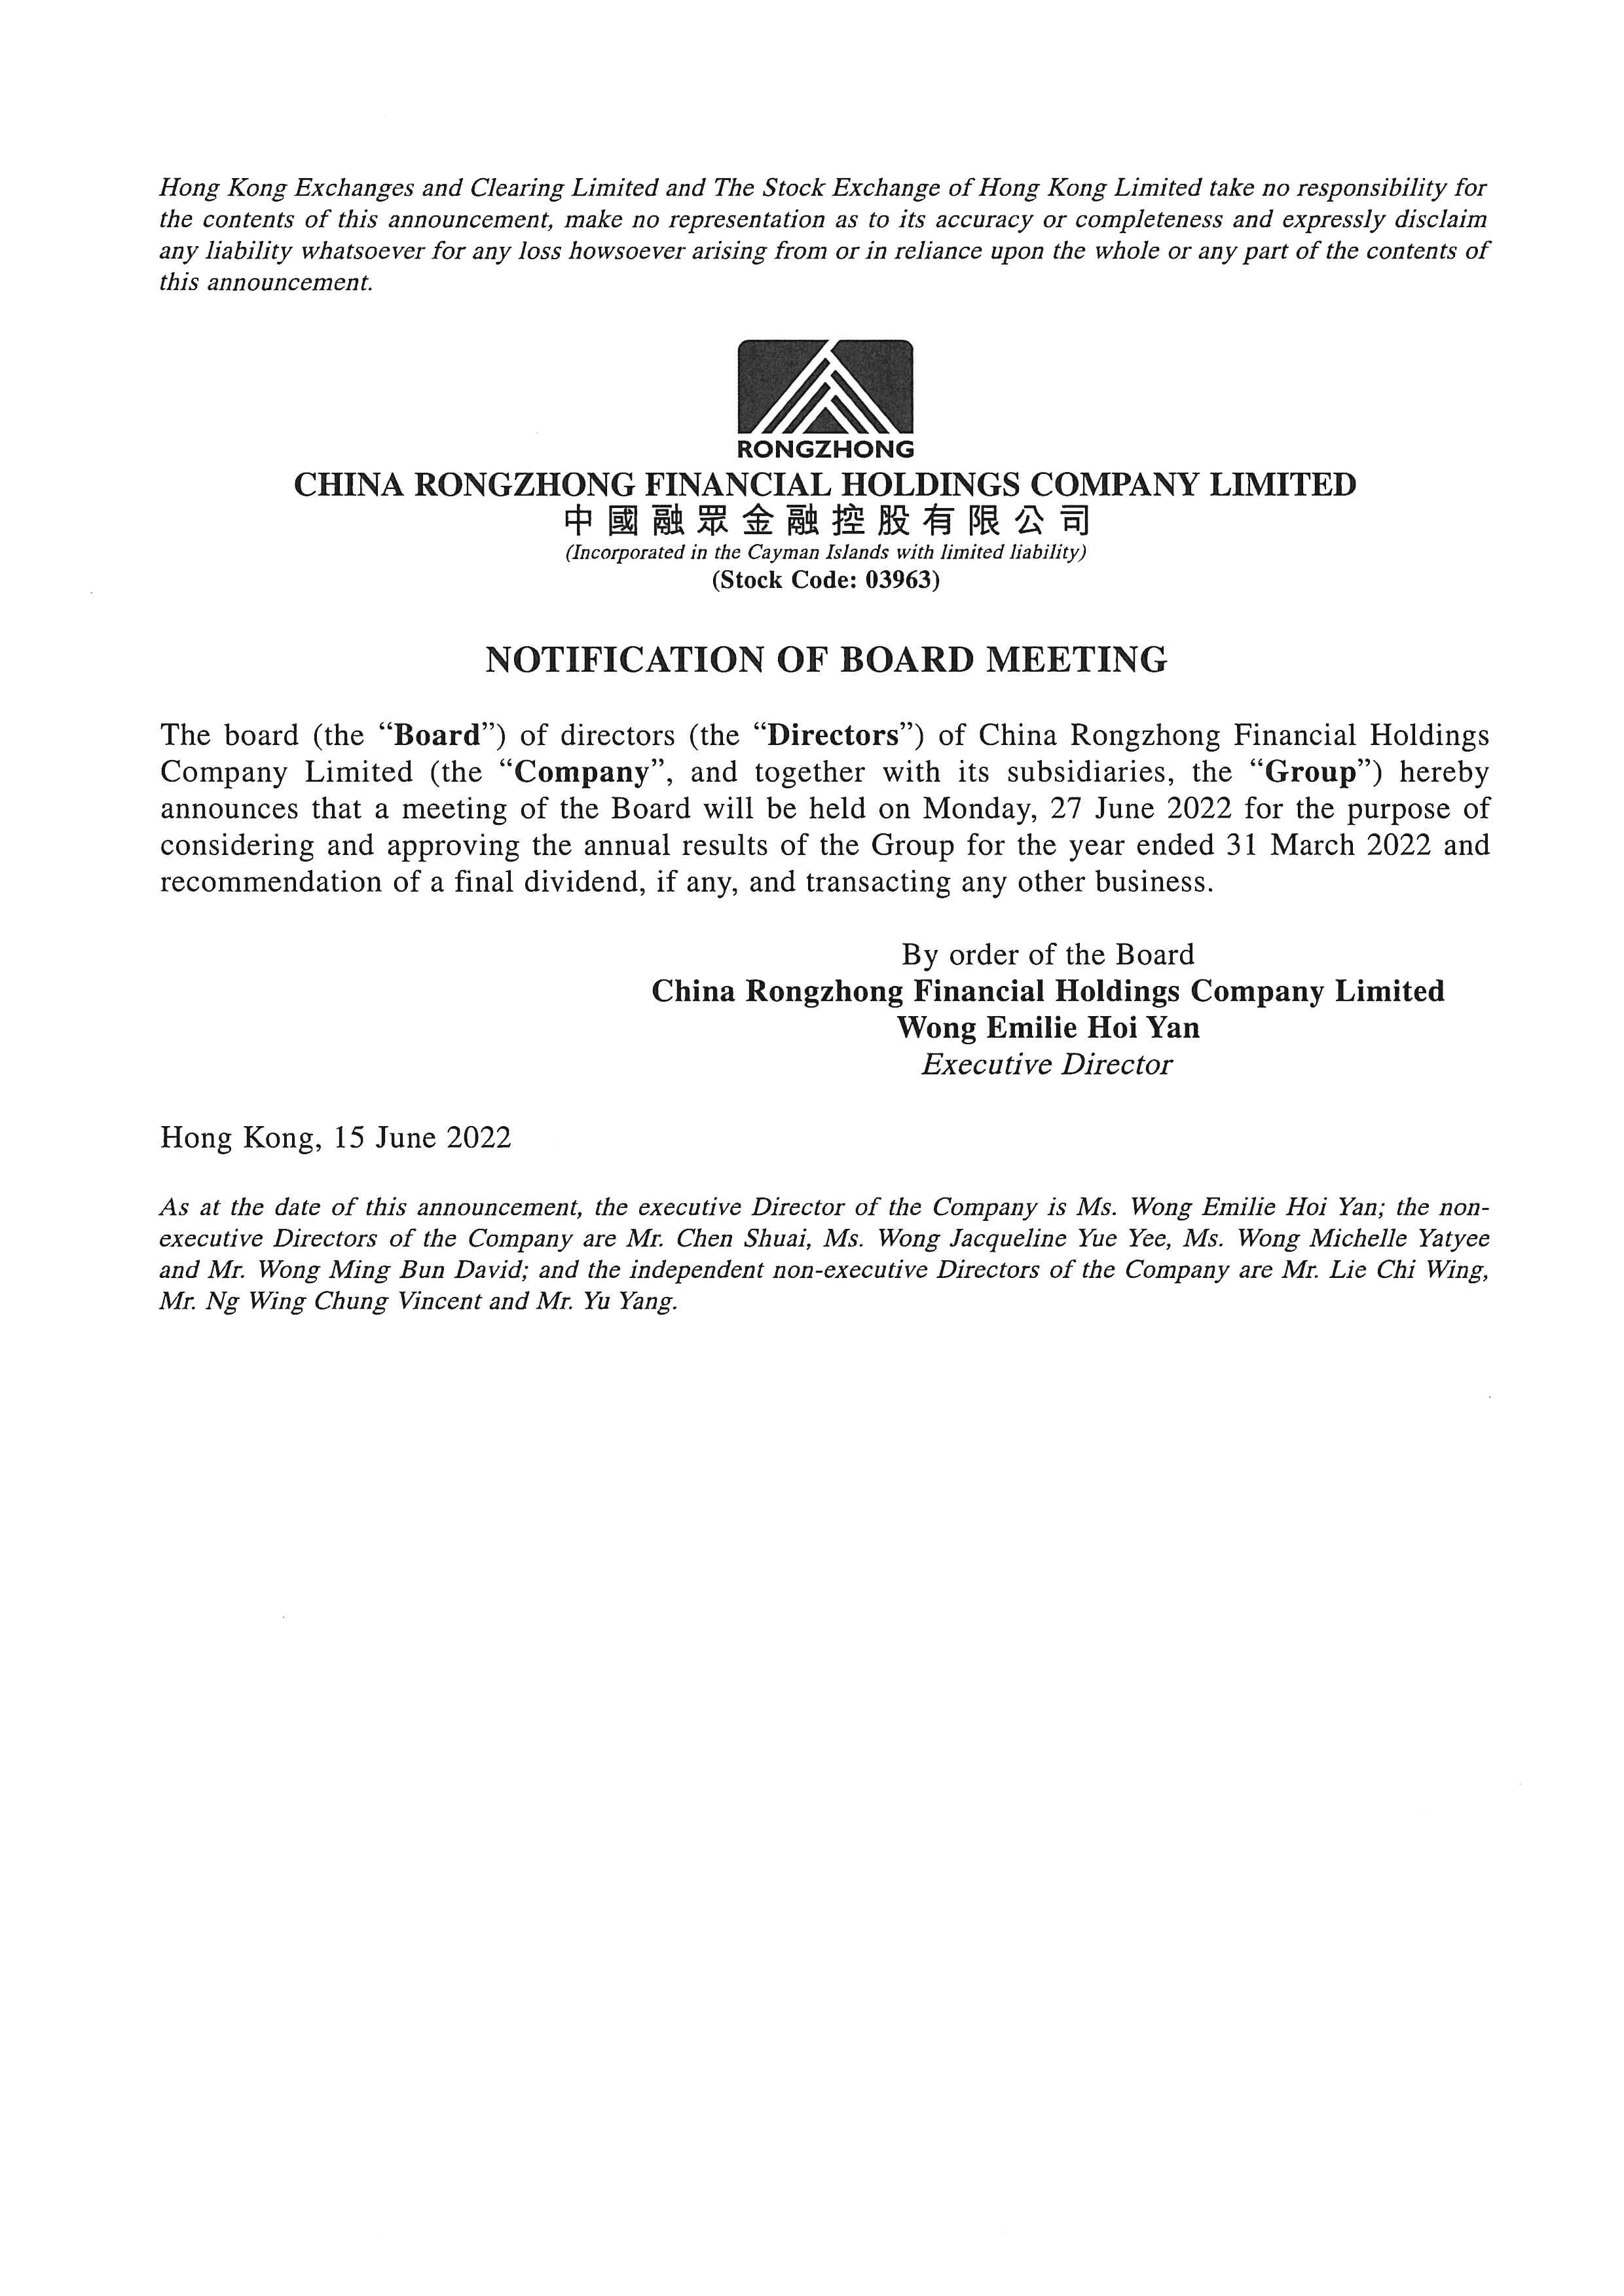 Announcements and Notices - [Date of Board Meeting]